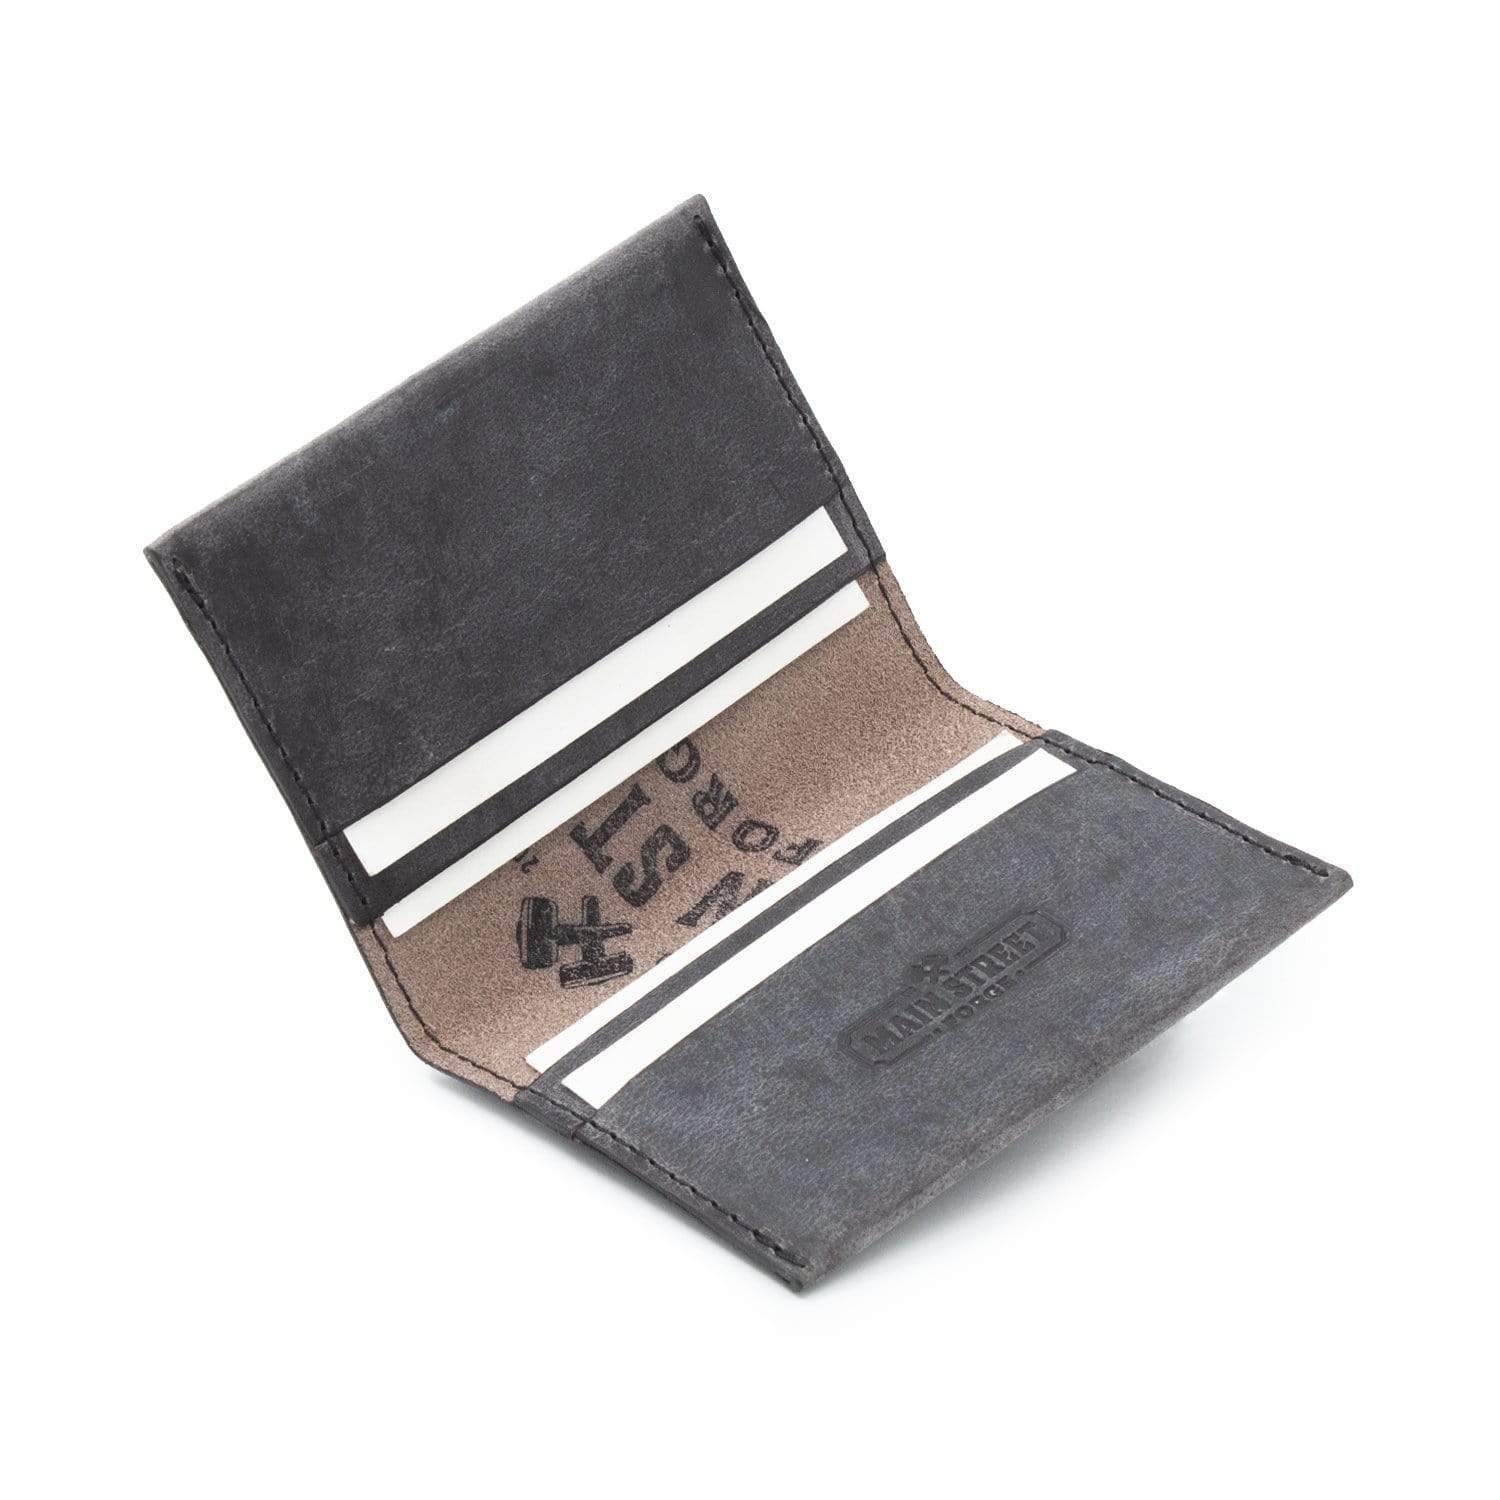 Grained Leather Card Holder